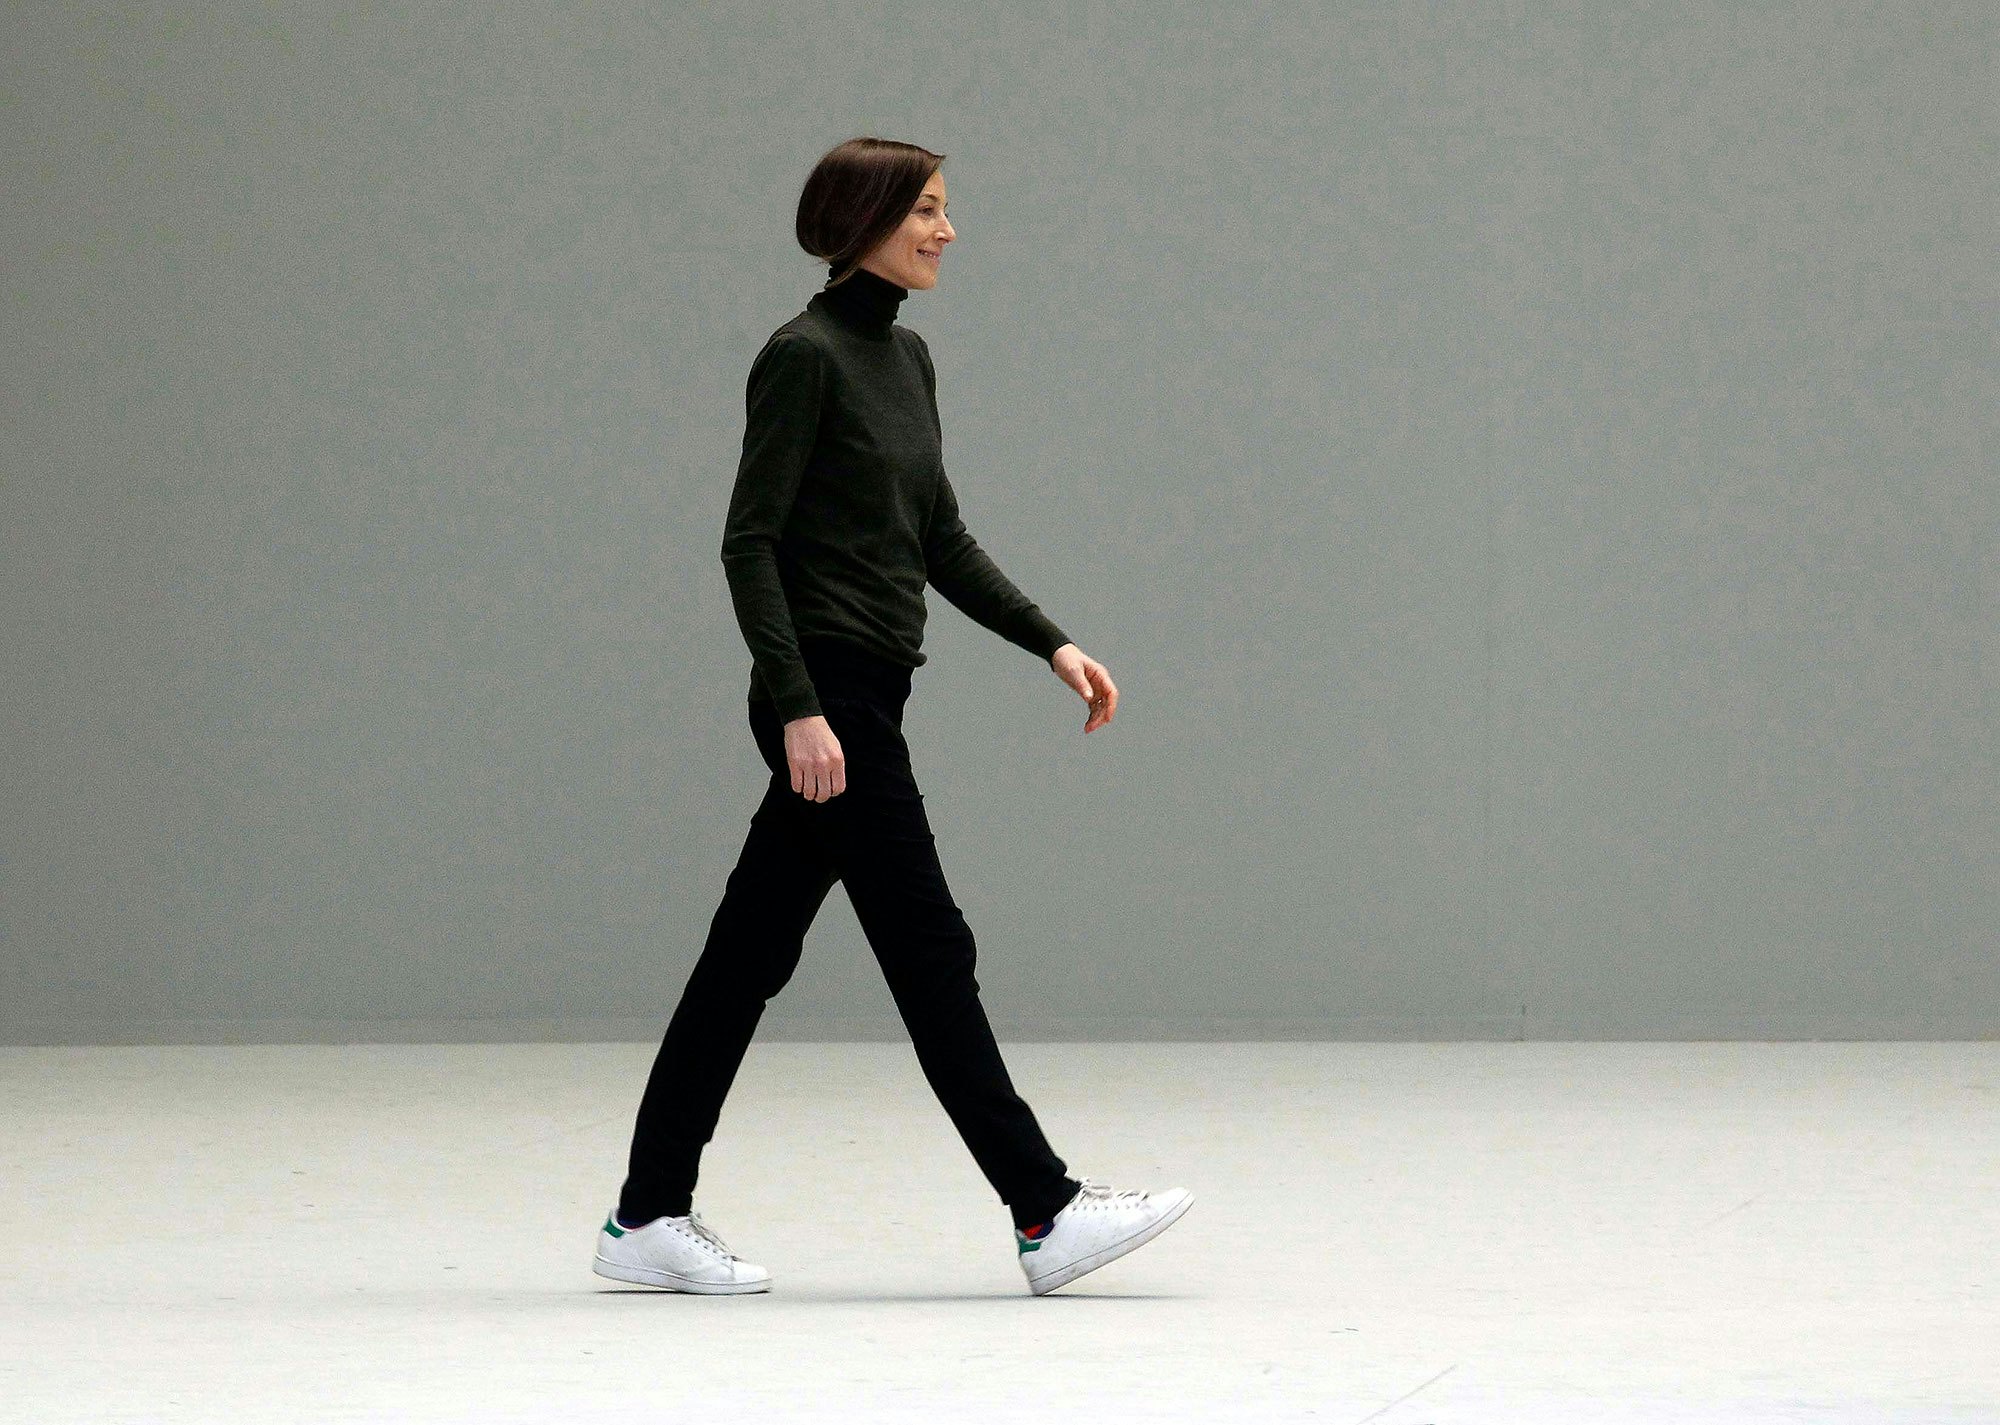 Phoebe Philo Steps Down from Céline with No Plans to Join Another